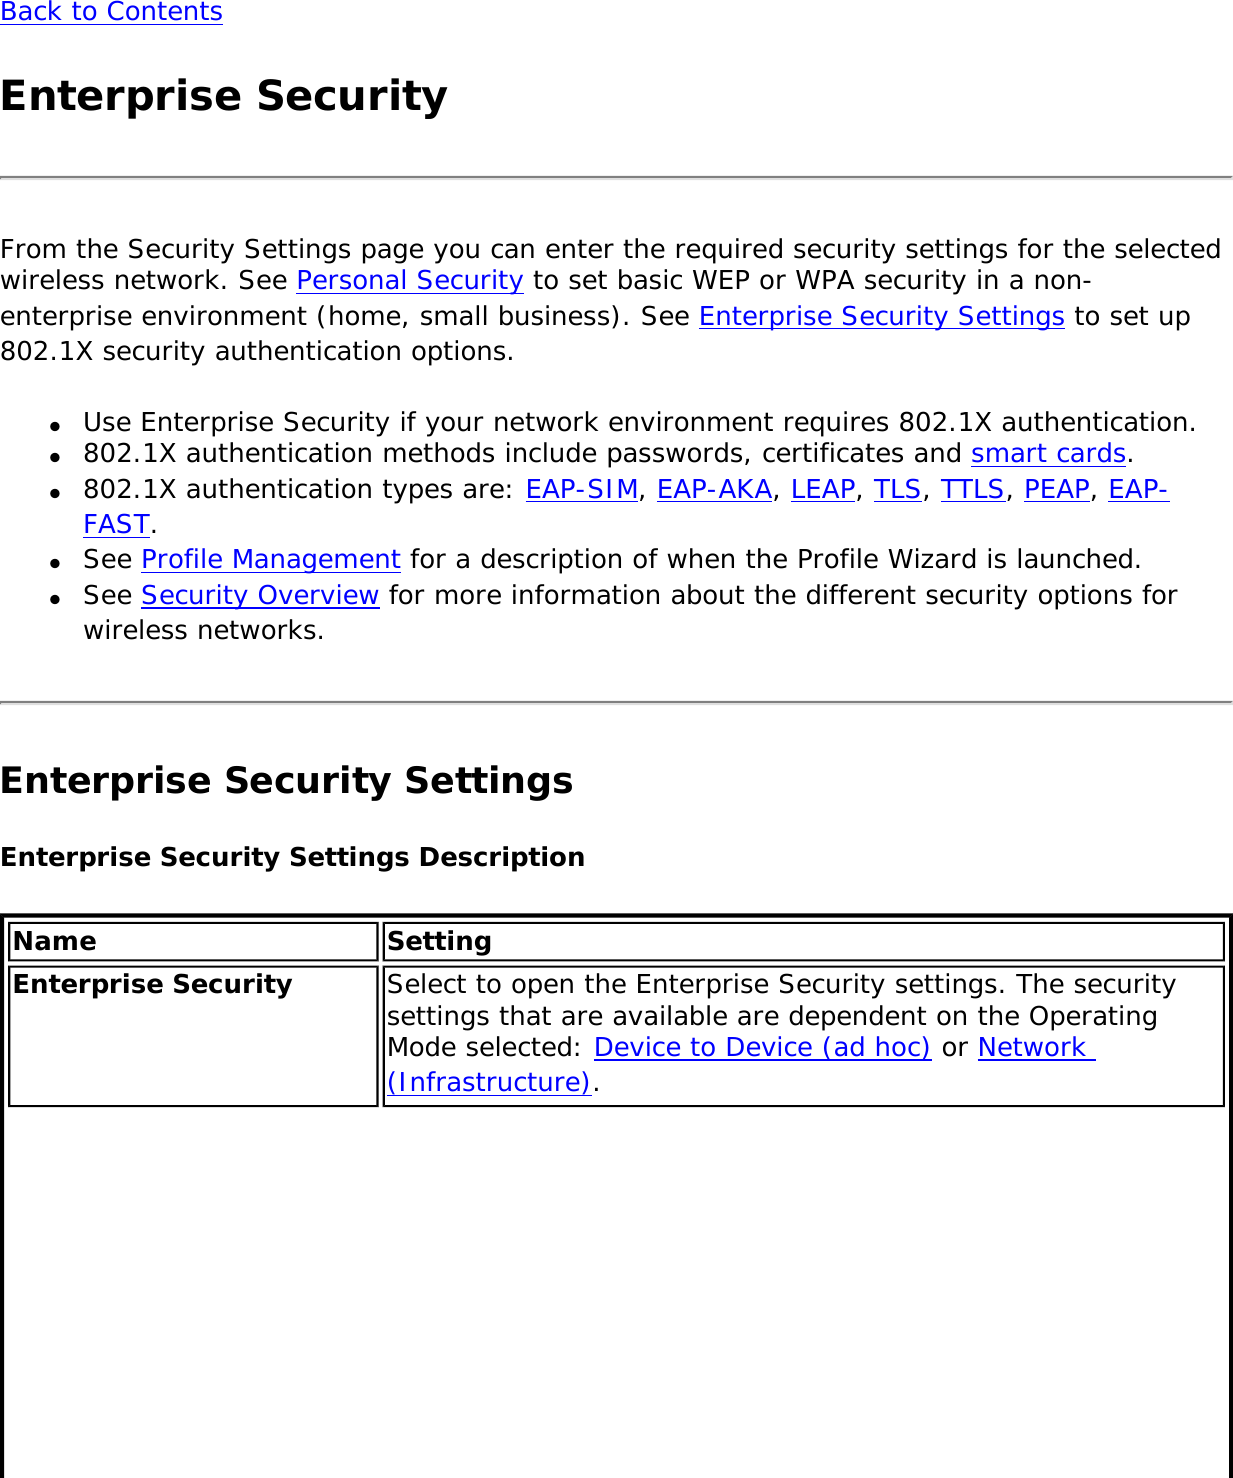 Back to ContentsEnterprise SecurityFrom the Security Settings page you can enter the required security settings for the selected wireless network. See Personal Security to set basic WEP or WPA security in a non-enterprise environment (home, small business). See Enterprise Security Settings to set up 802.1X security authentication options.●     Use Enterprise Security if your network environment requires 802.1X authentication.●     802.1X authentication methods include passwords, certificates and smart cards. ●     802.1X authentication types are: EAP-SIM, EAP-AKA, LEAP, TLS, TTLS, PEAP, EAP-FAST. ●     See Profile Management for a description of when the Profile Wizard is launched.●     See Security Overview for more information about the different security options for wireless networks.Enterprise Security Settings Enterprise Security Settings Description Name SettingEnterprise Security  Select to open the Enterprise Security settings. The security settings that are available are dependent on the Operating Mode selected: Device to Device (ad hoc) or Network (Infrastructure). 